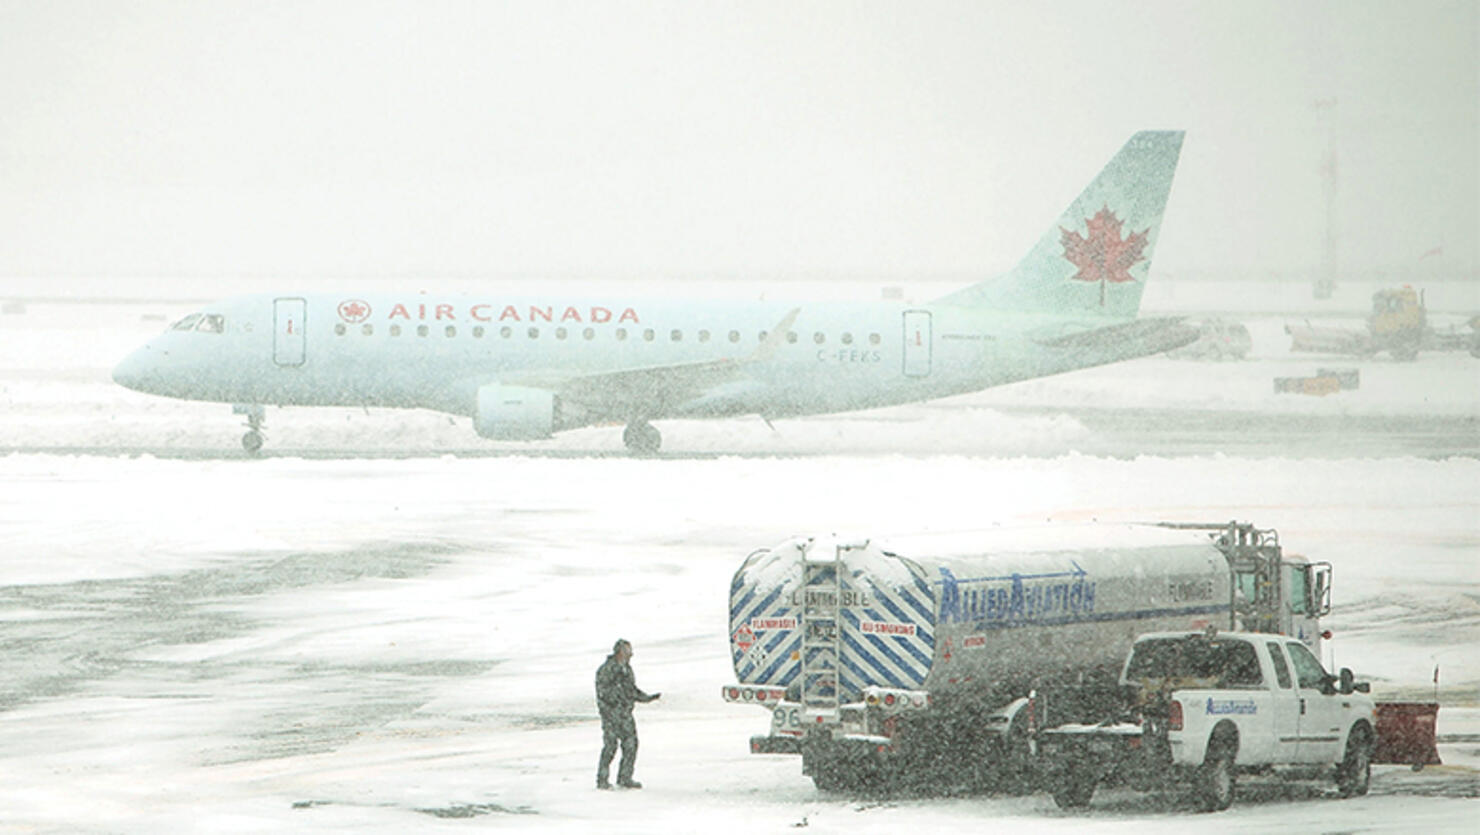 An Air Canada plane is viewed on the tarmac